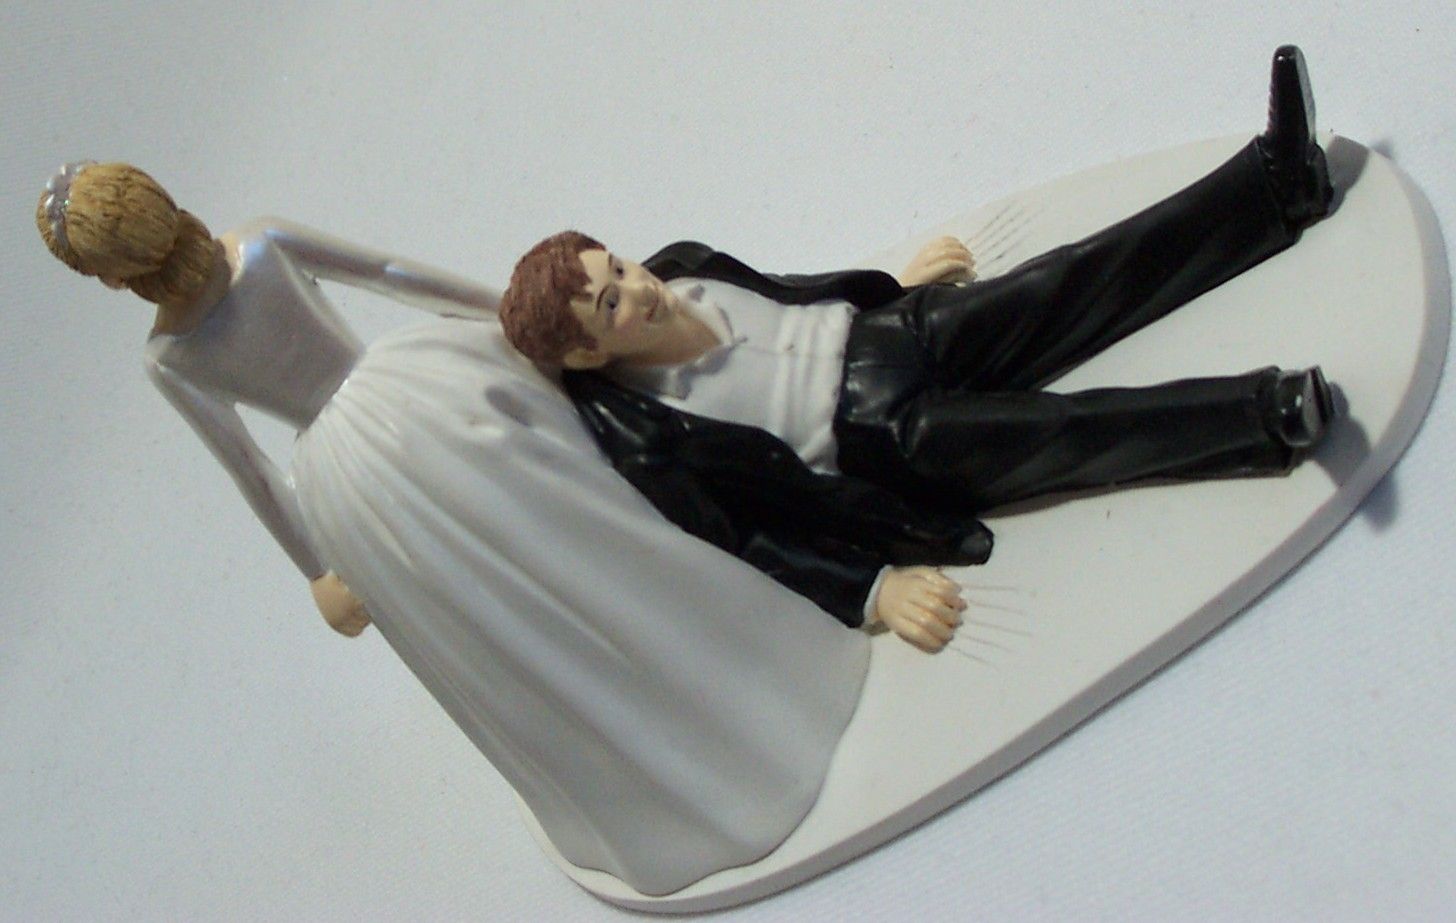   BRIDAL WEDDING HUMOROUS SEXY CAKE TOPPER Bride Drags Groom to Alter